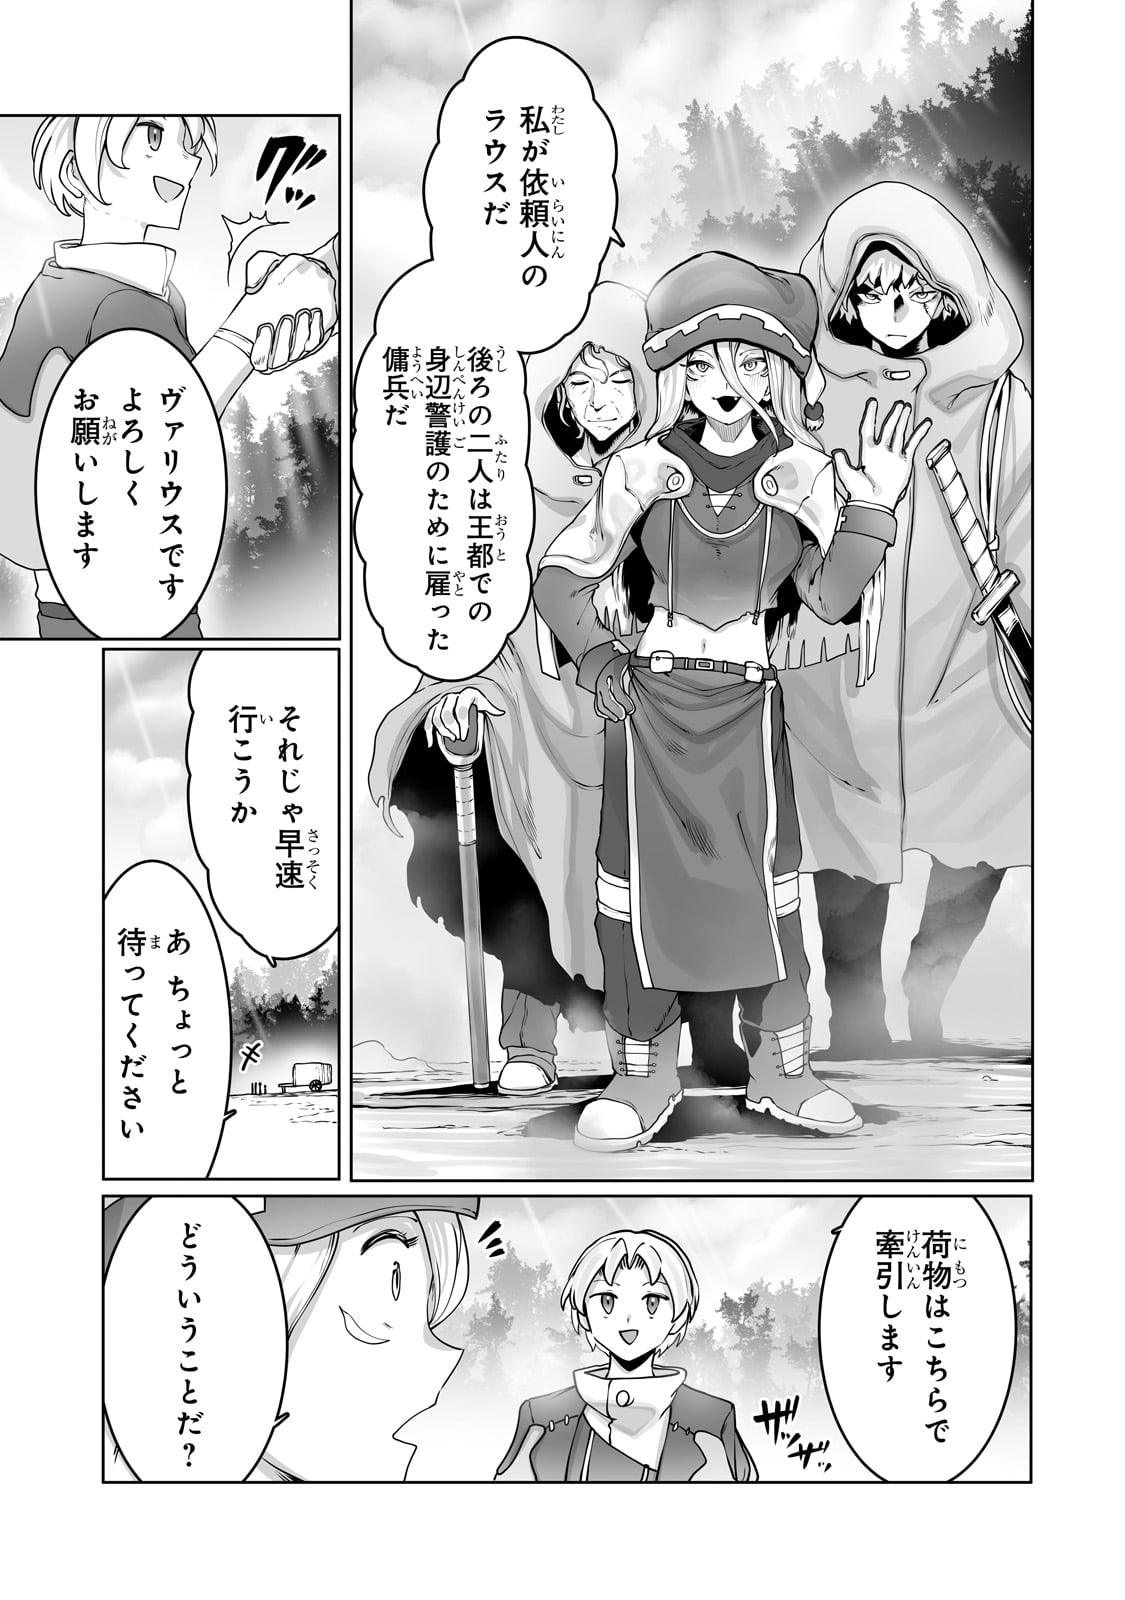 The Useless Tamer Will Turn Into the Top Unconsciously by My Previous Life Knowledge - Chapter 35 - Page 3